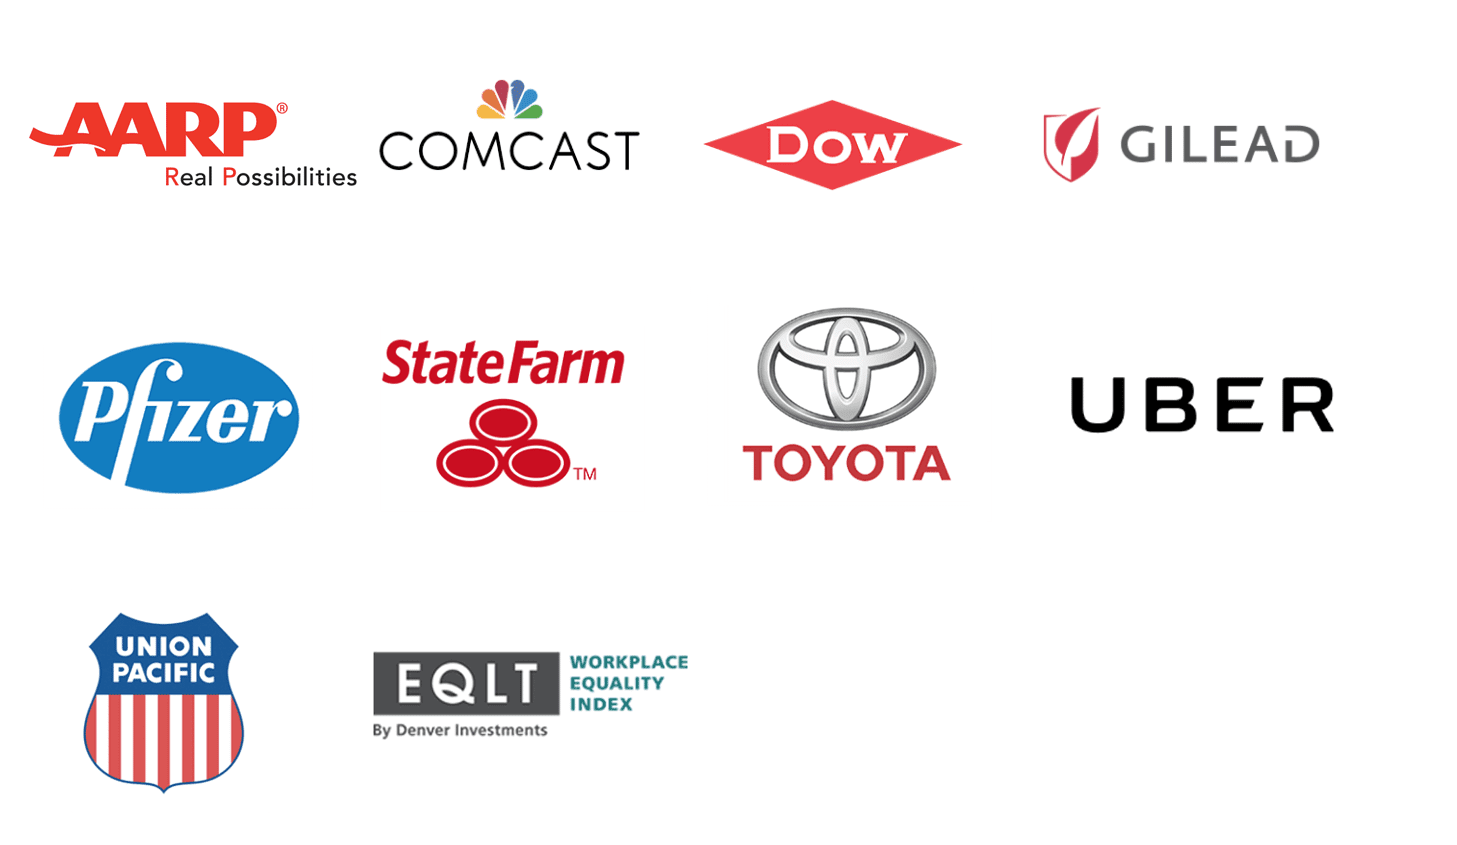 LGBTQ Conference Sponsor logos: AARP, Comcast, DOW, Gilead, Pfizer, State Farm, Toyota, Uber, Union Pacific, Workplace Equality Index